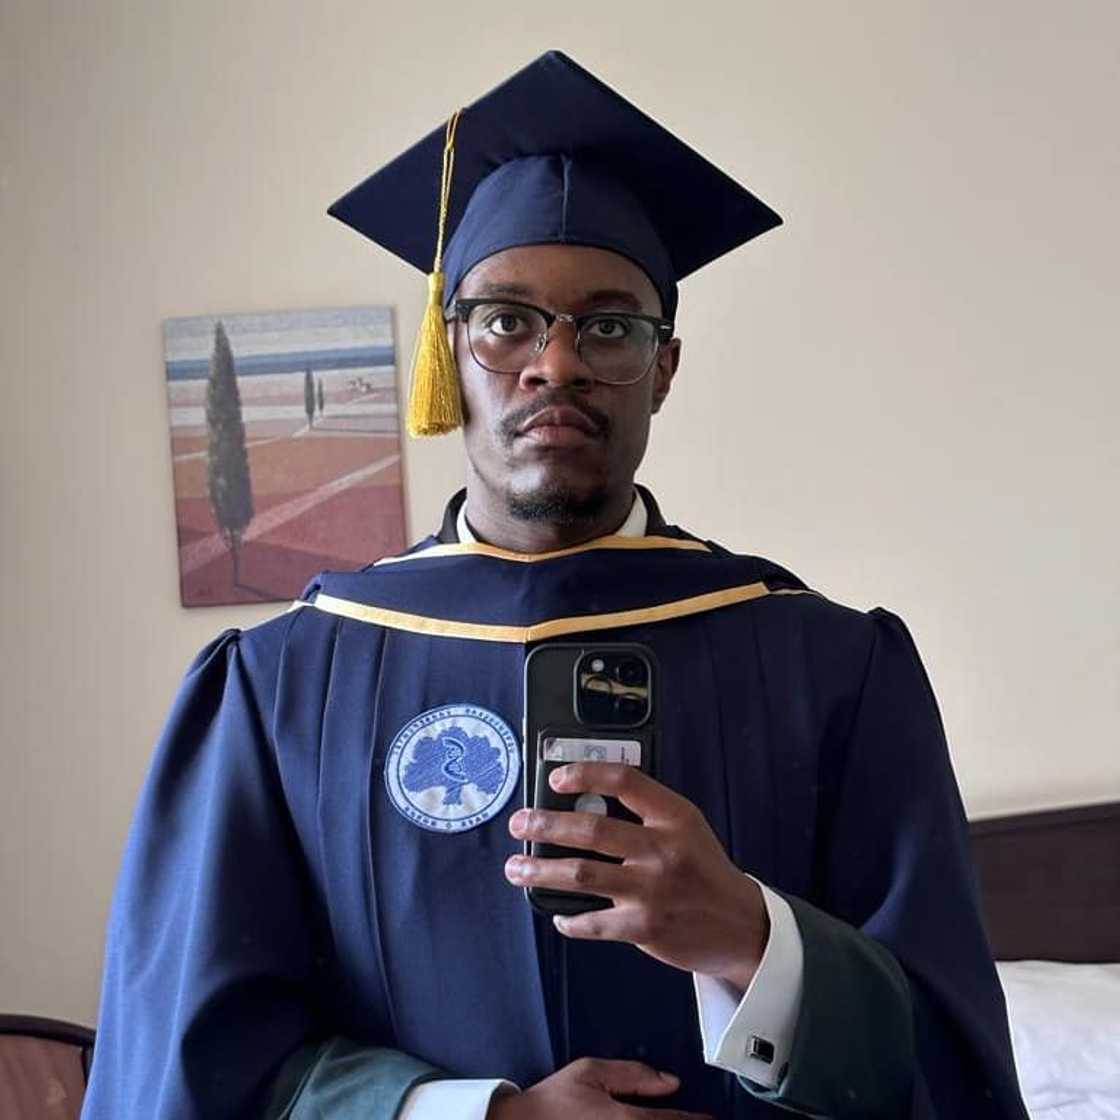 A man graduated with two degrees from a Russian university